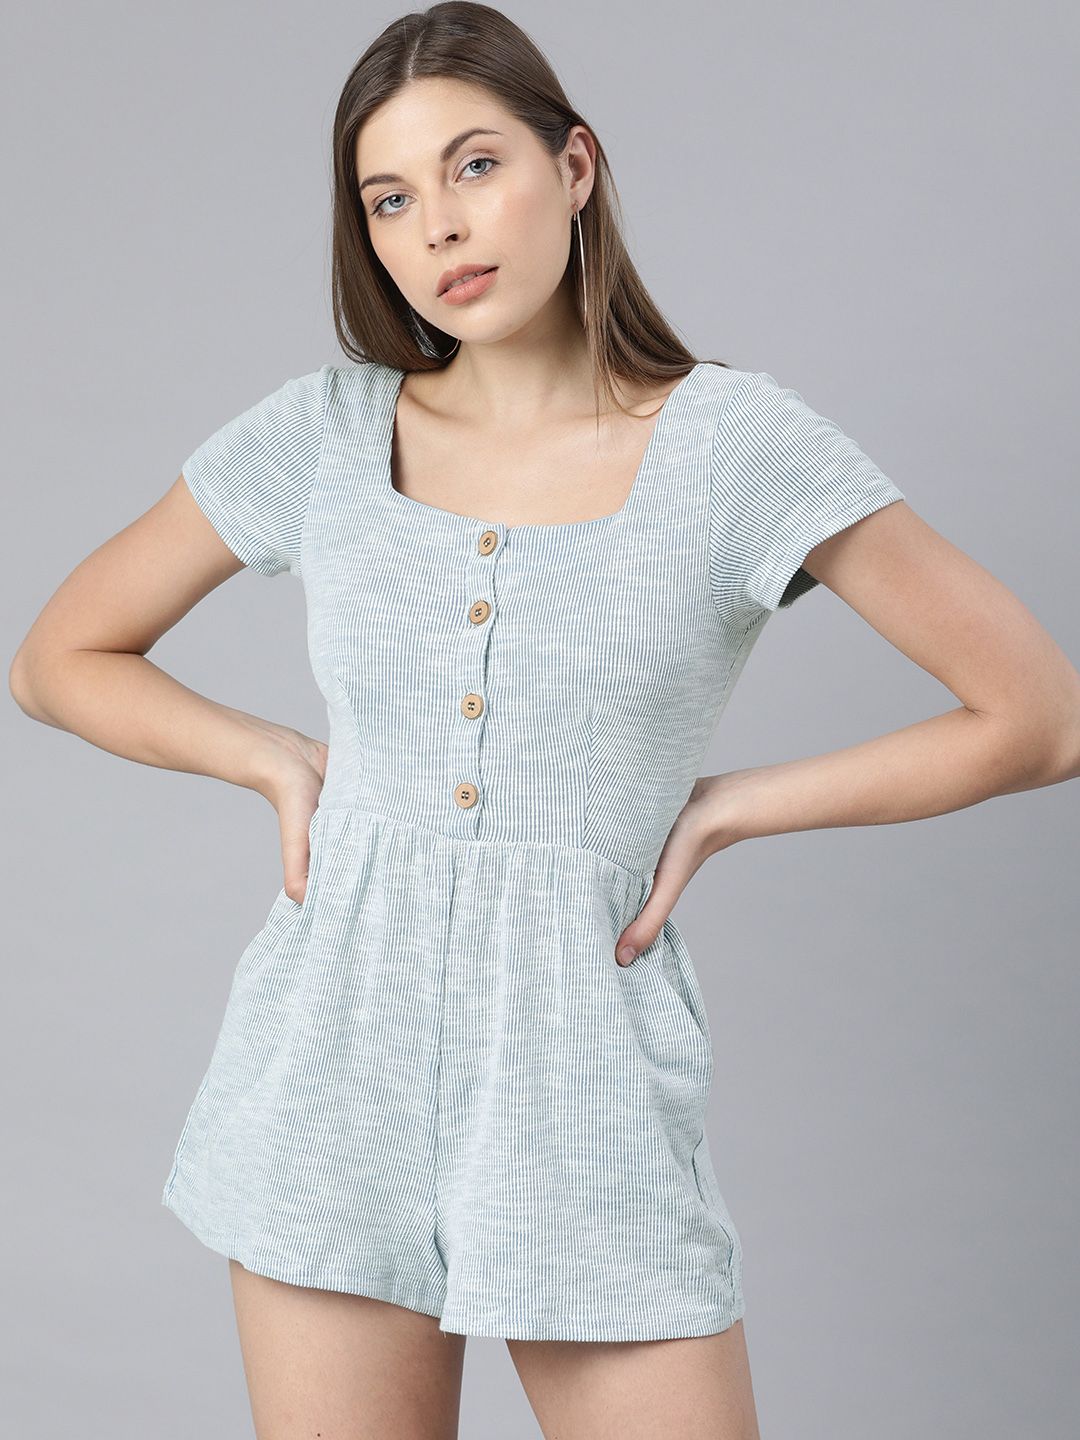 ONLY Women Blue & White Striped Playsuit Price in India